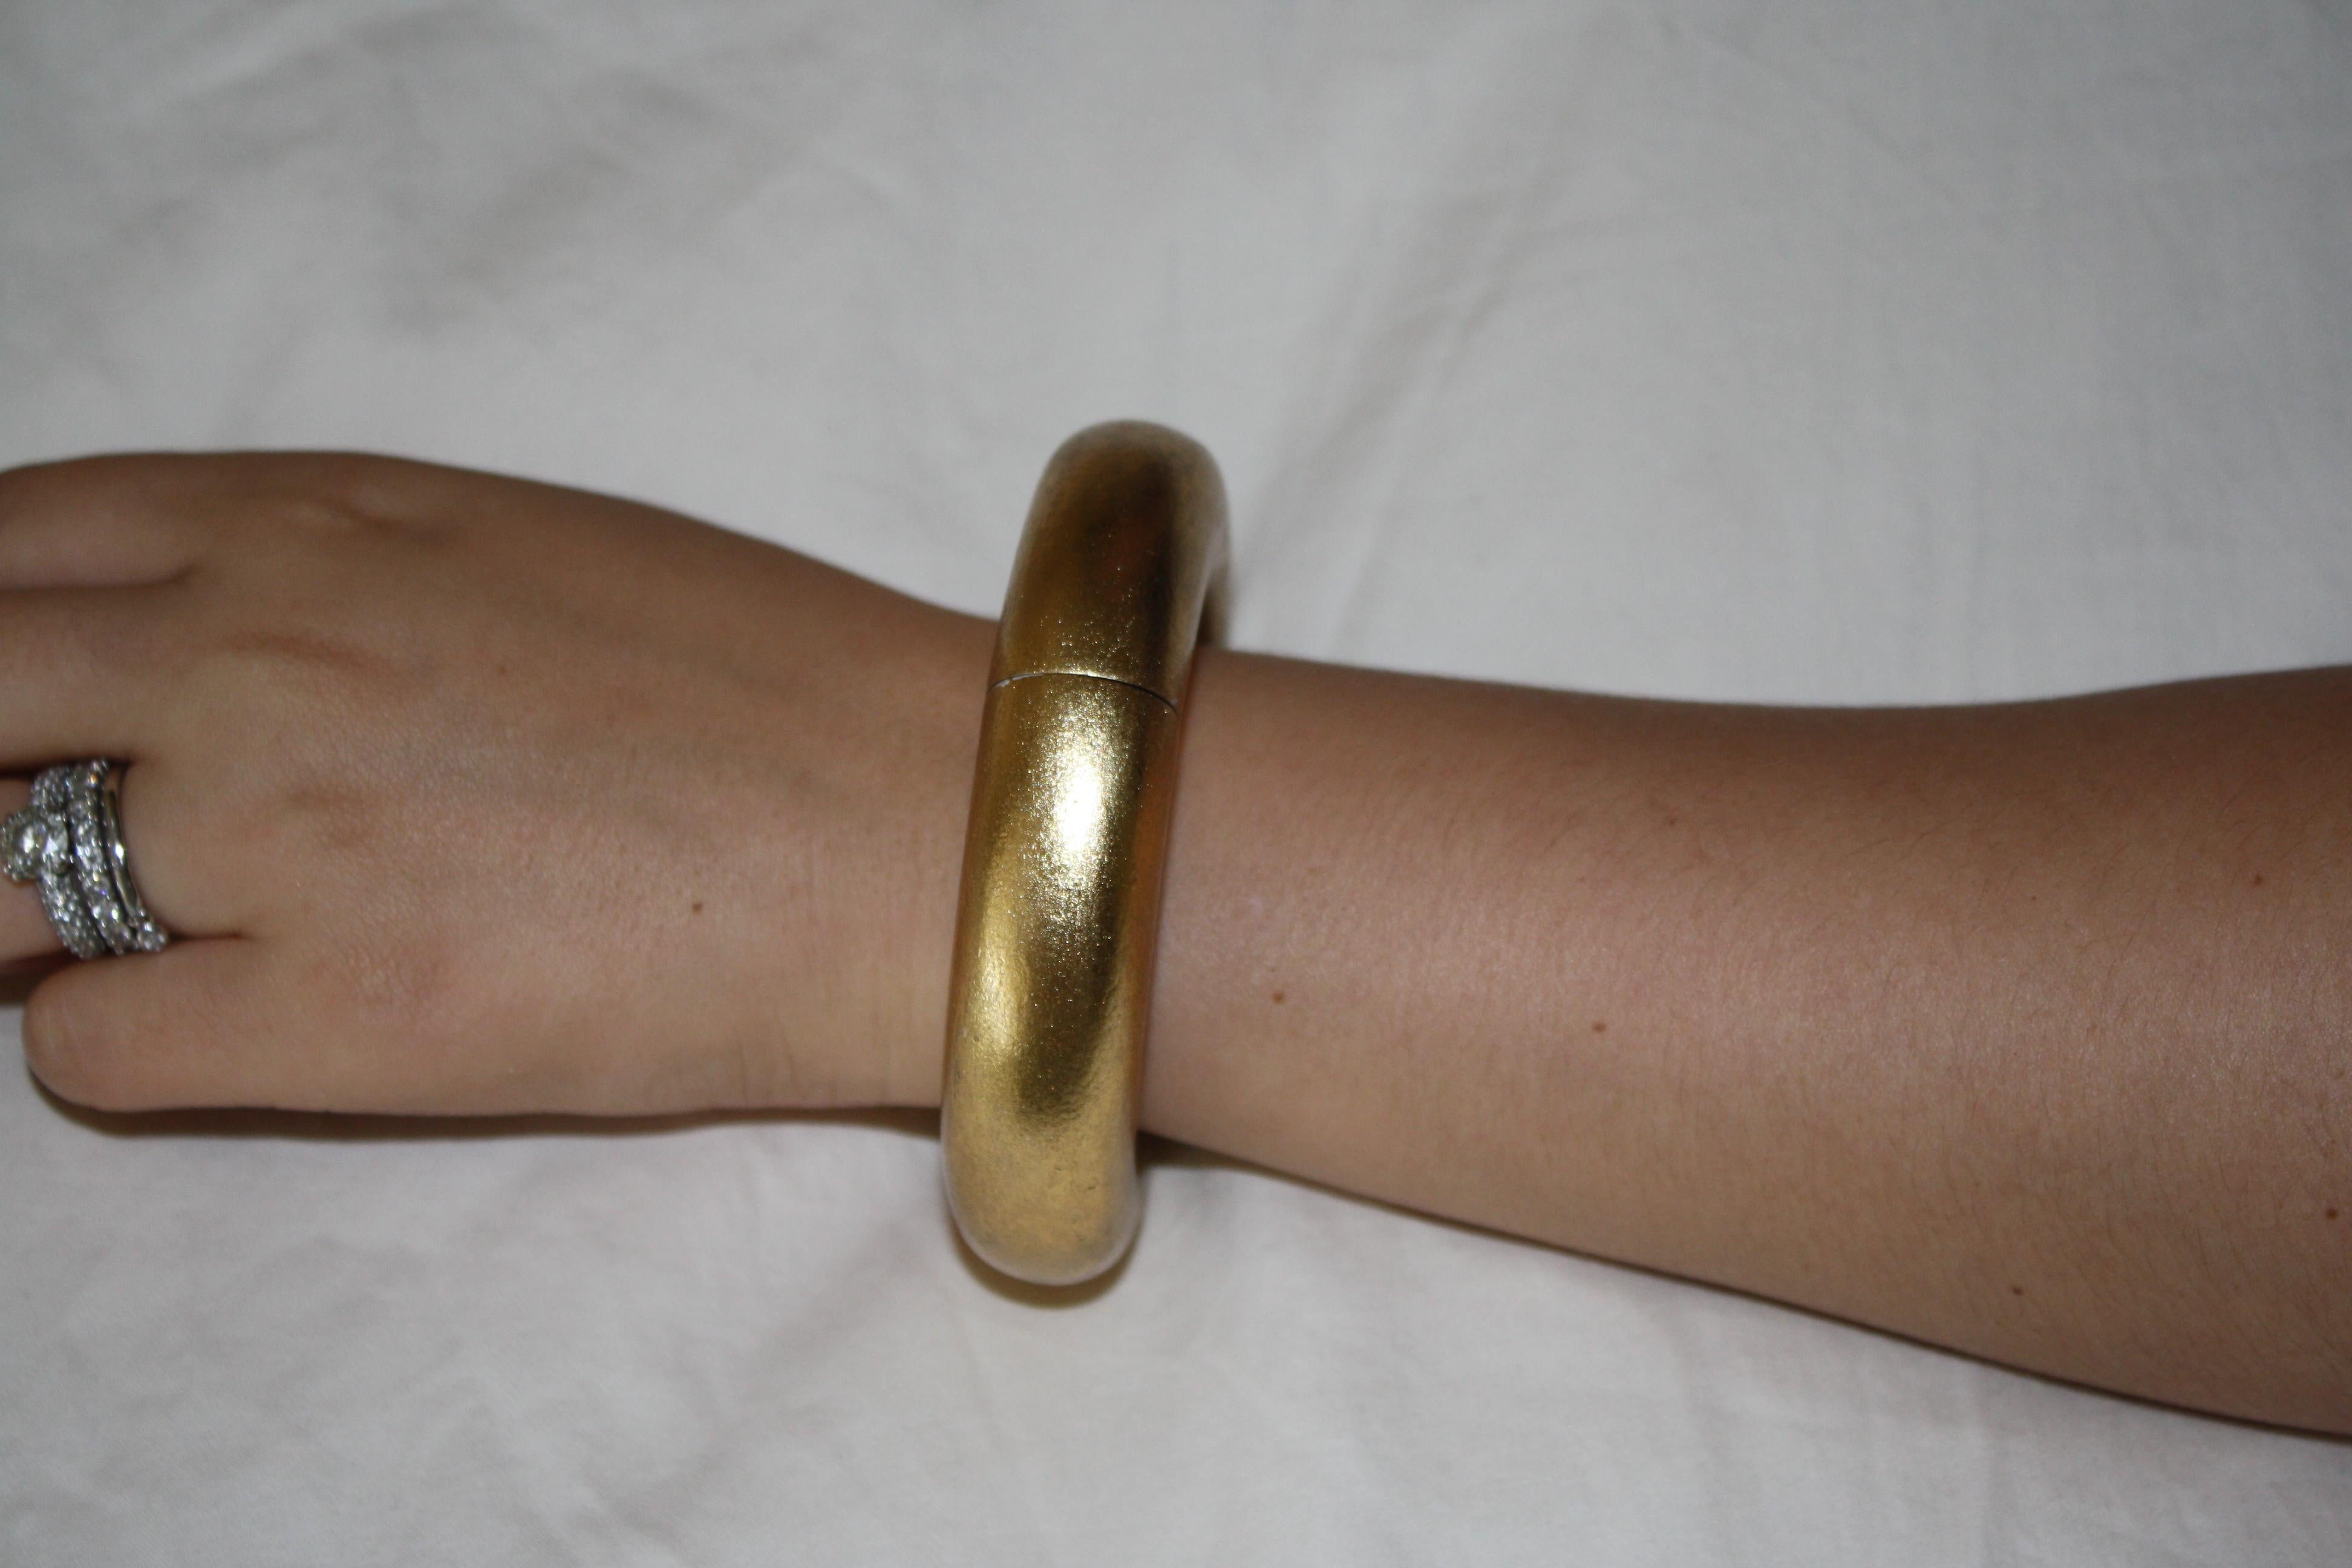 Statement bangle in gold leaf from Monies Denmark. These bangles are awesome because they have an elastic interior making it possible to get on and off despite the size of your hand. 

circumference 3.5” - inside 2.5”